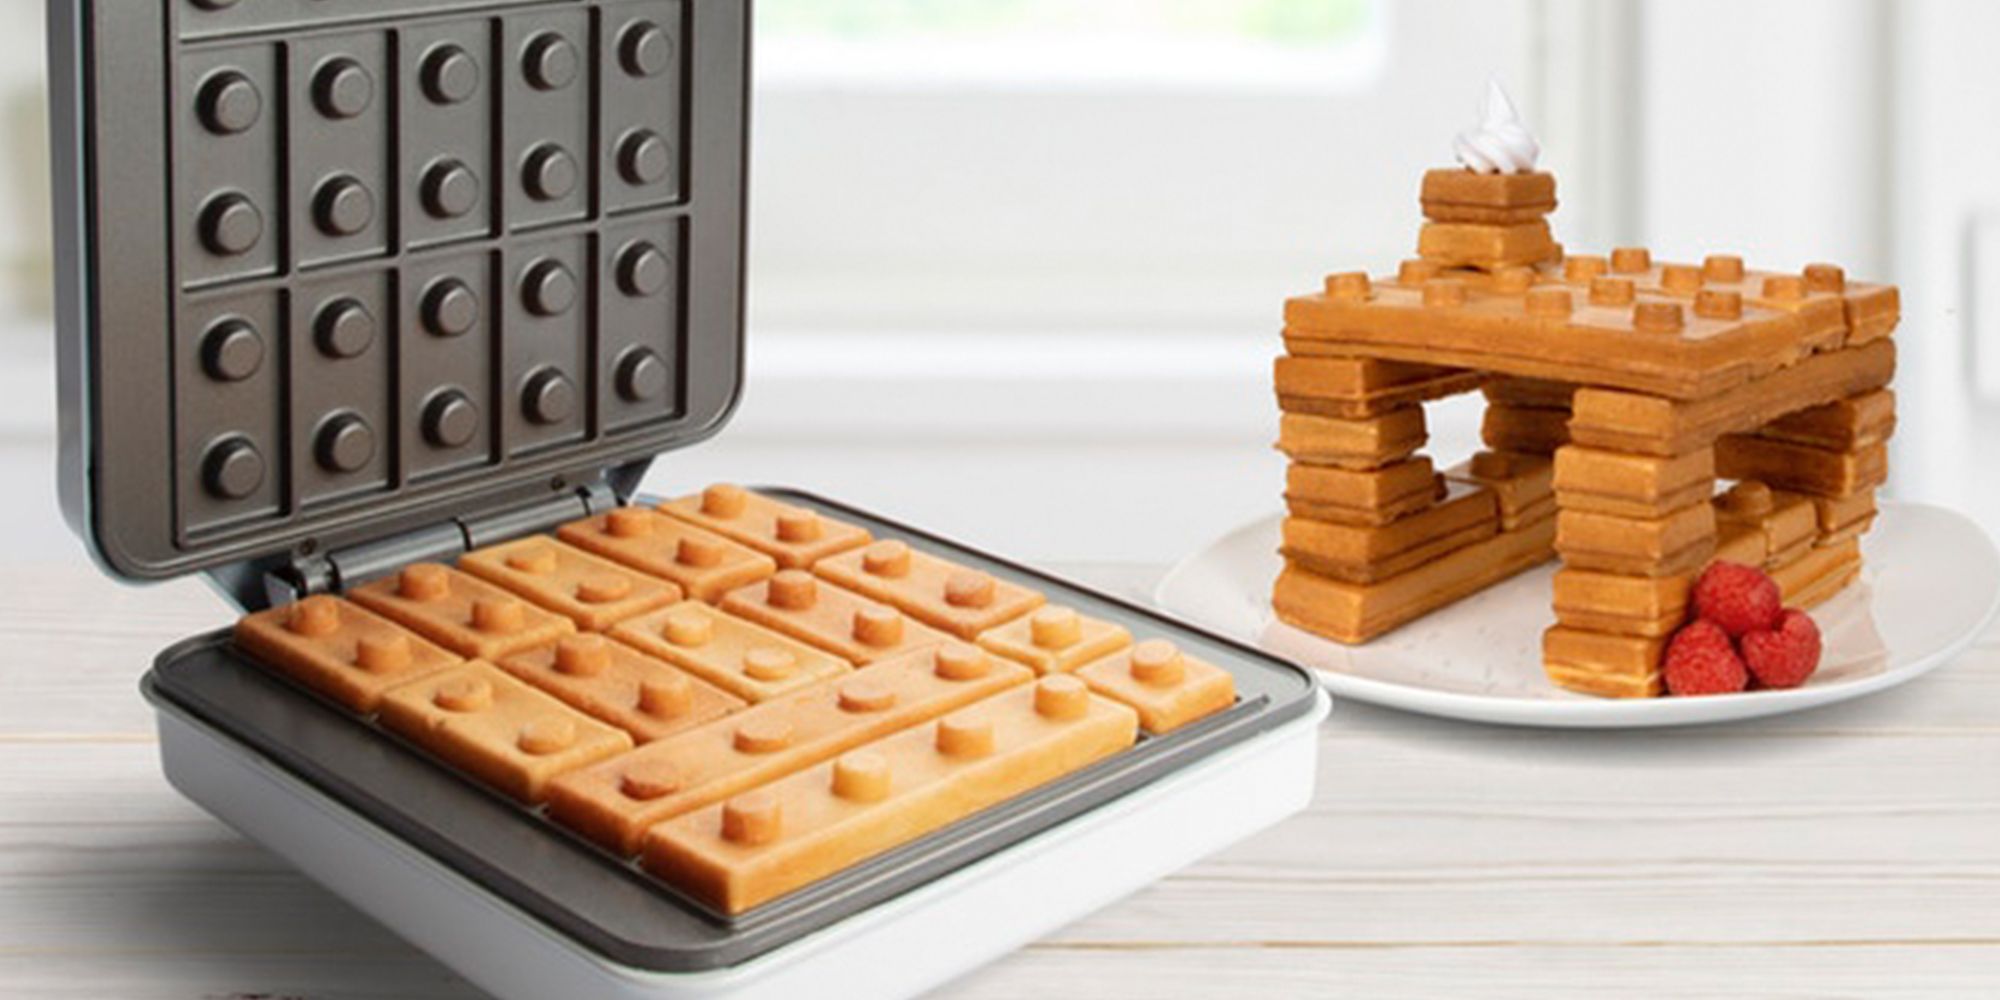 This Lego Waffle Maker Lets You Build a Brick Creation Your Breakfast